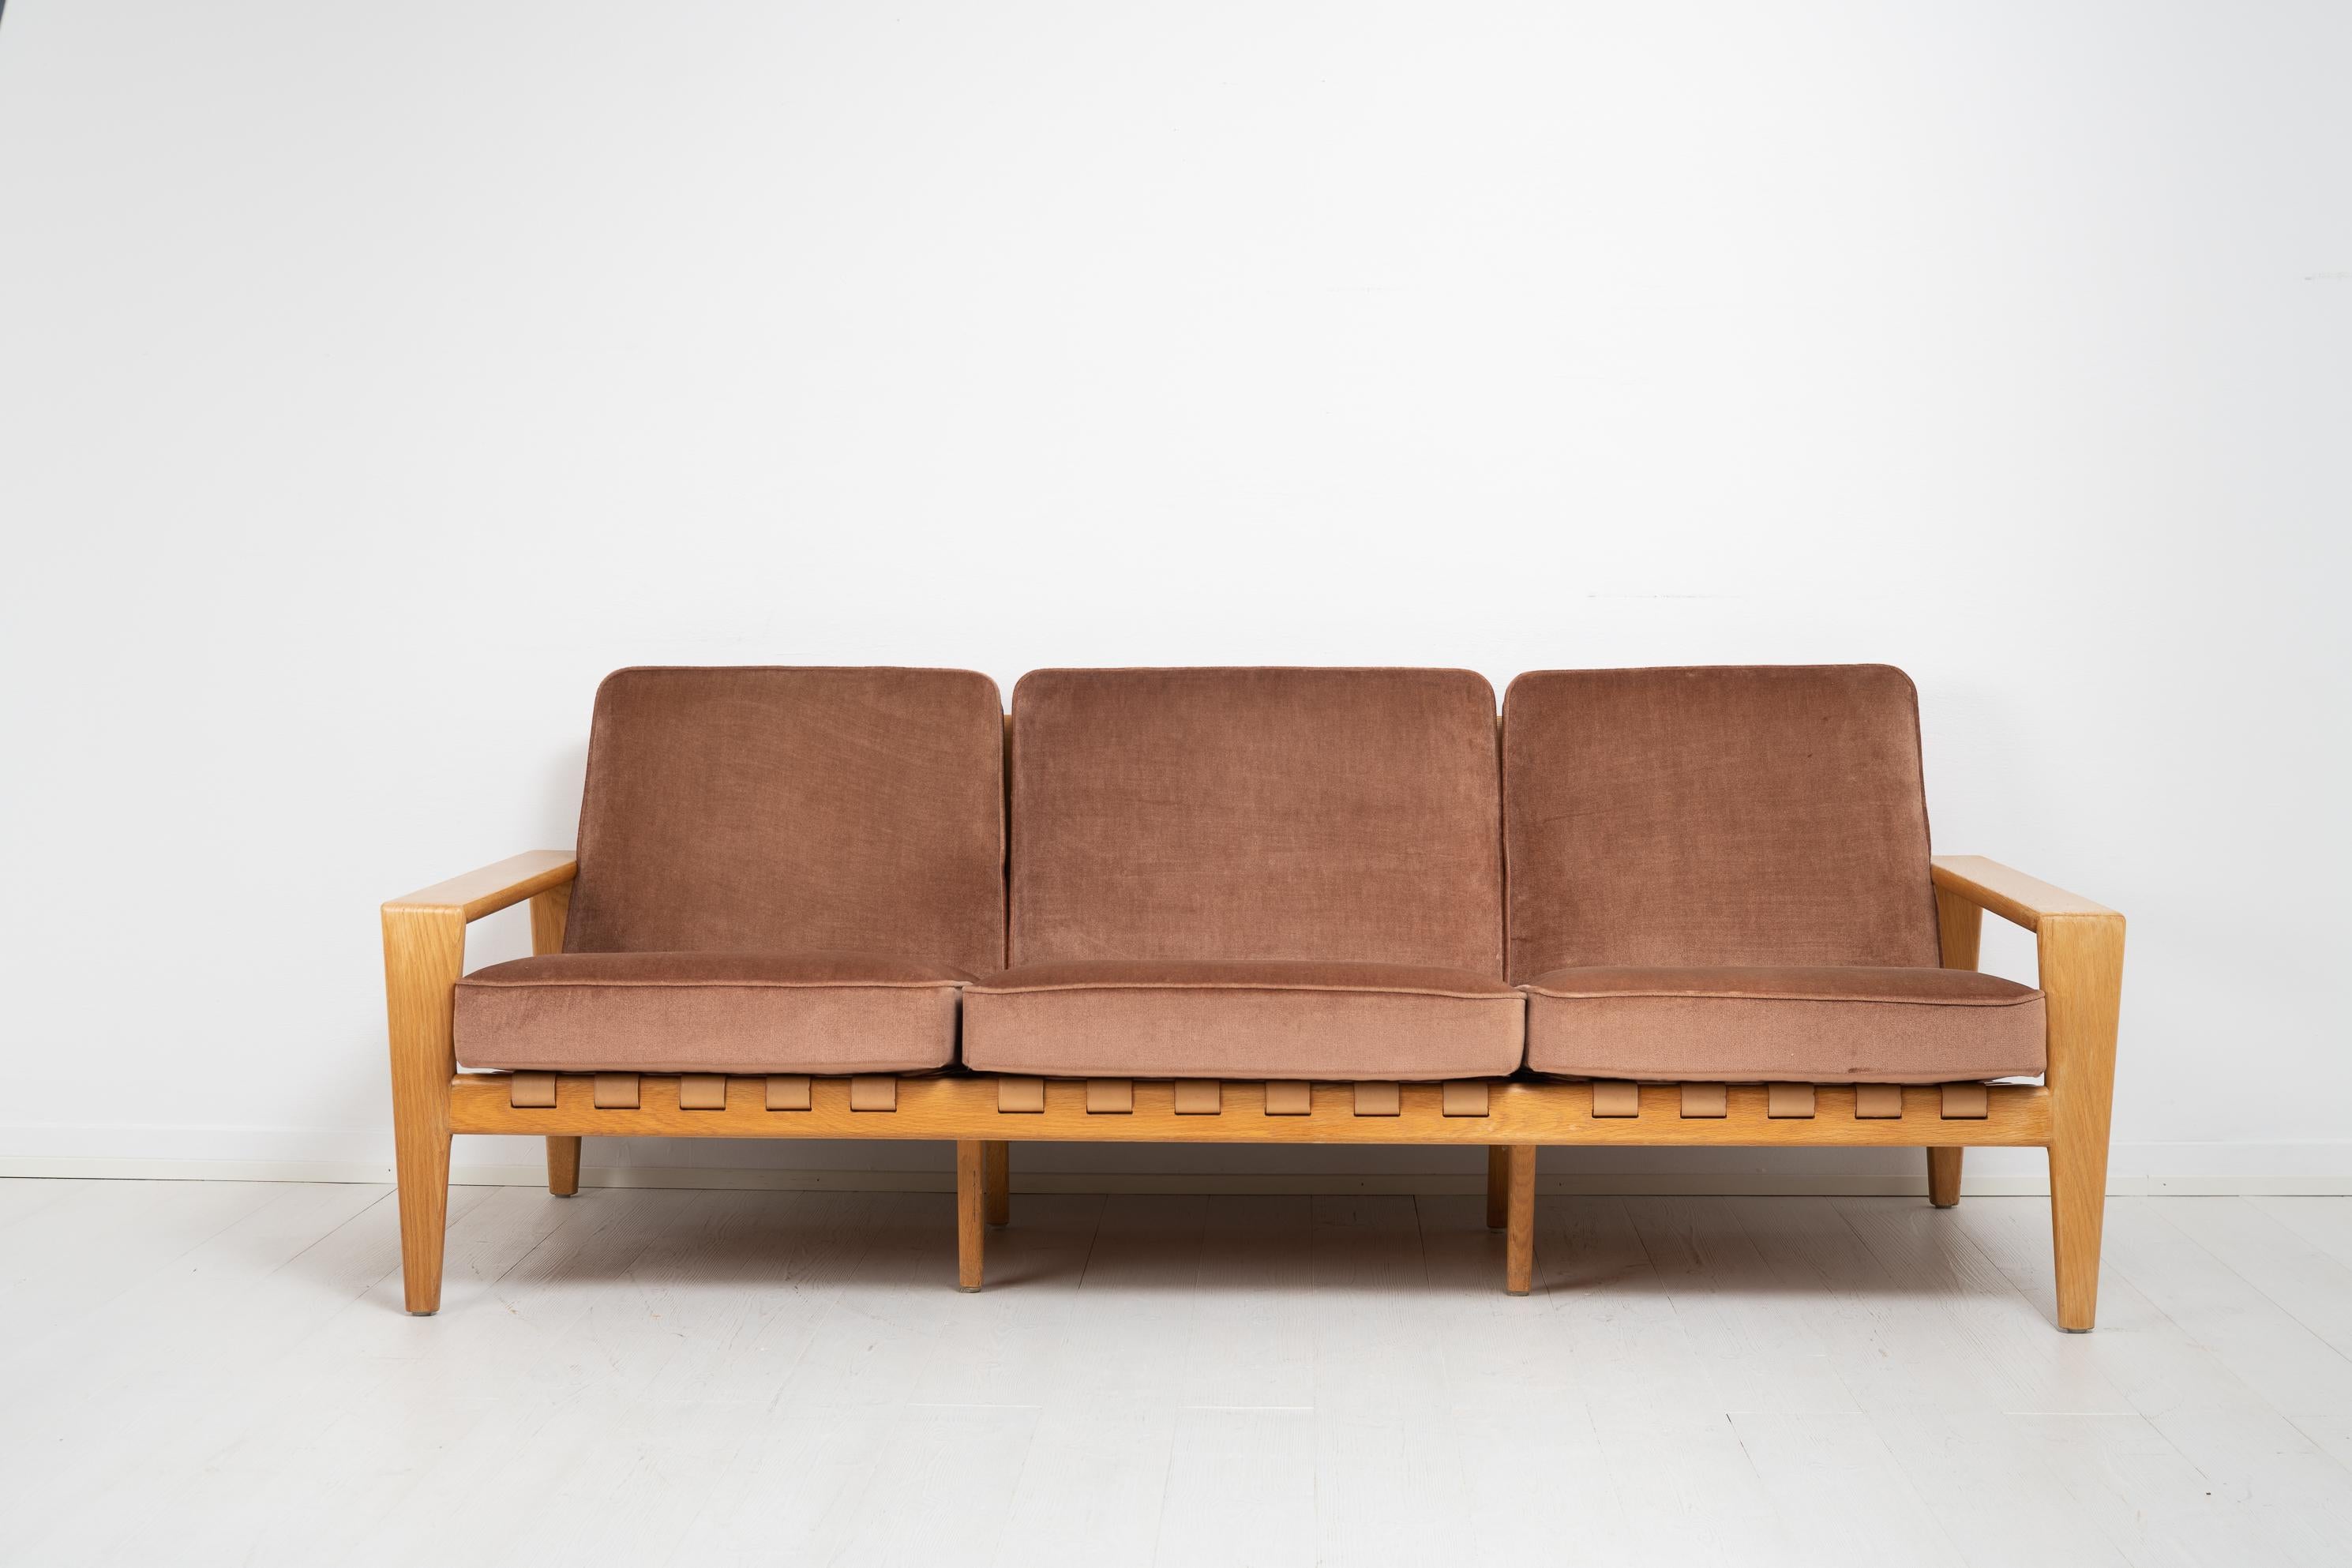 Scandinavian Modern Bodö sofa by Svante Skogh in light oak. The sofa is a 3-seater and was first shown 1957 at the Stockholm Furniture Fair. Made by AB Hjertquist & co in Nässjö, Sweden. A characteristic example of Scandinavian modern style with